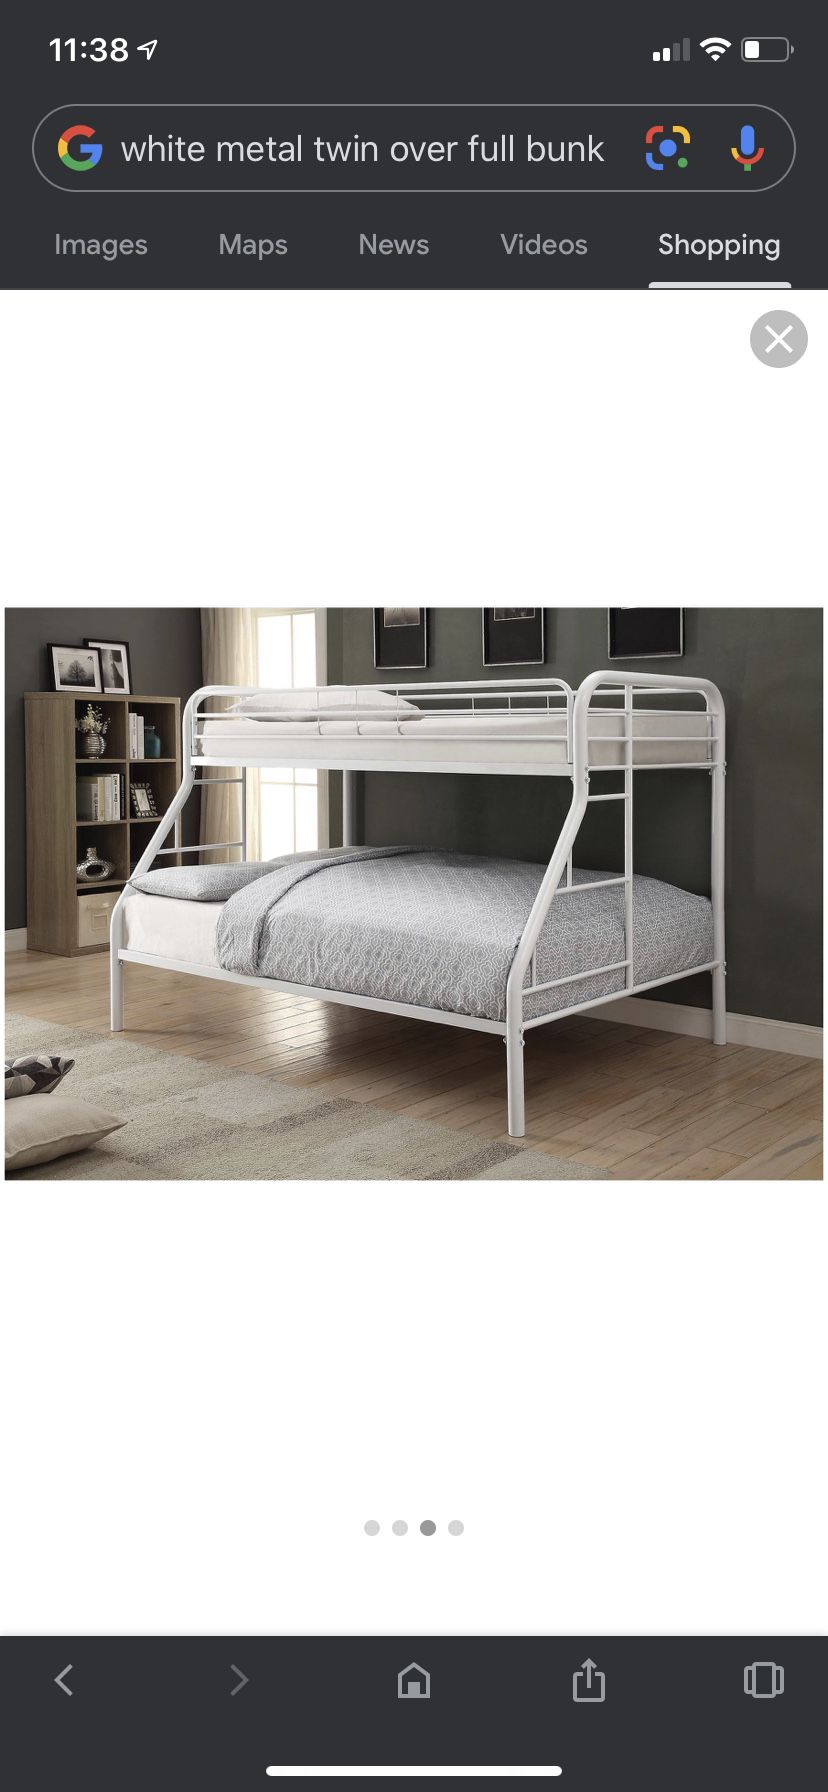 Sturdy white metal bunk bed - twin over full bed